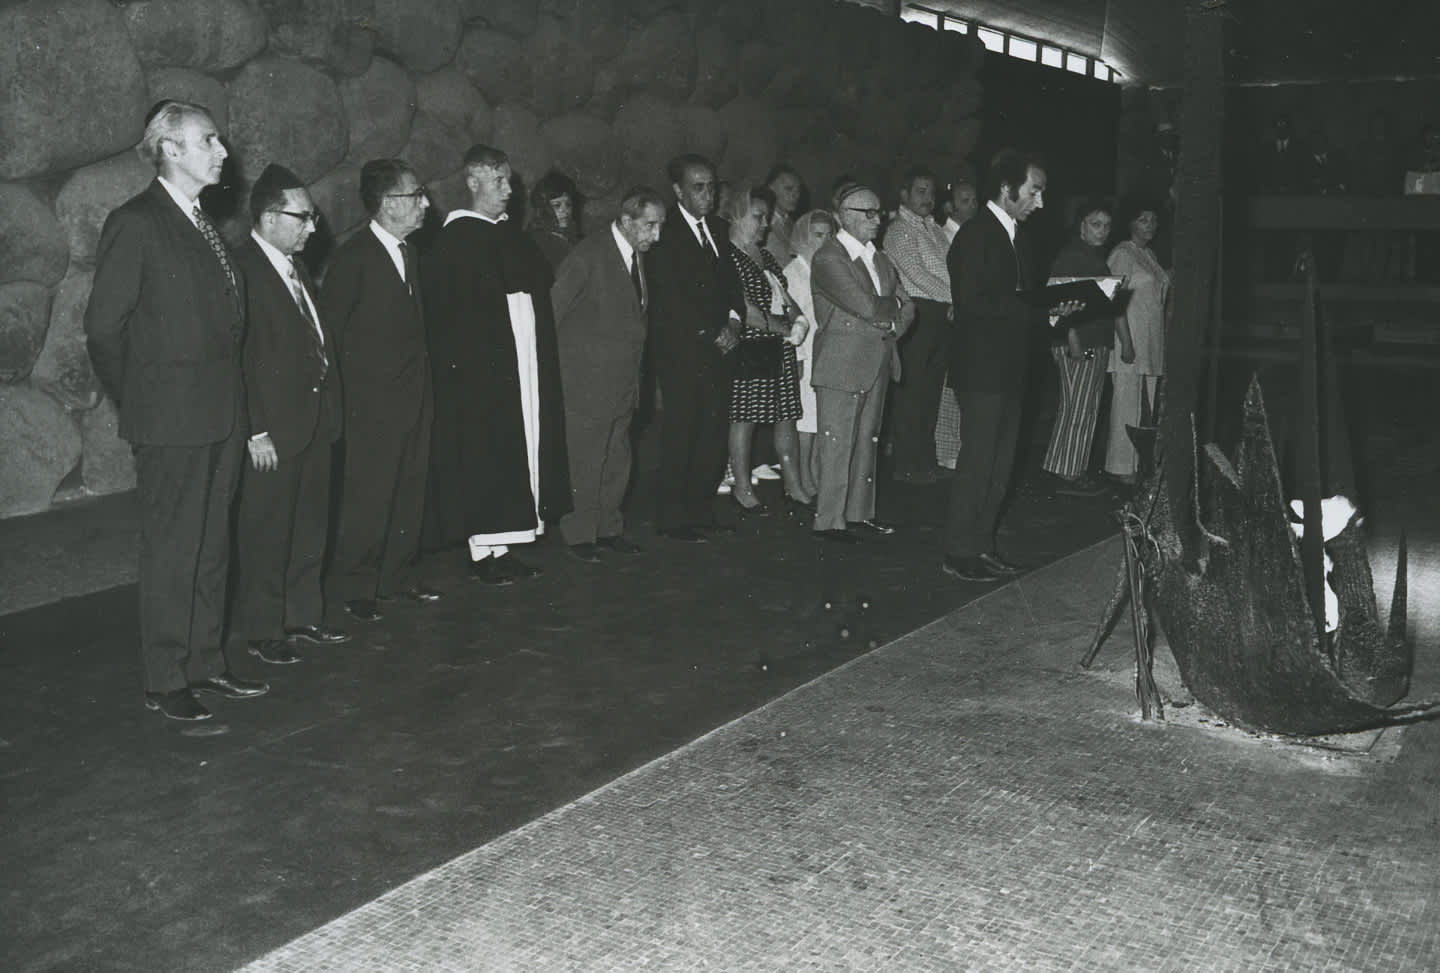 Ceremony in Honor of Cipriano Ricotti in the Hall of Remembrance. Yad Vashem, 02.05.1973